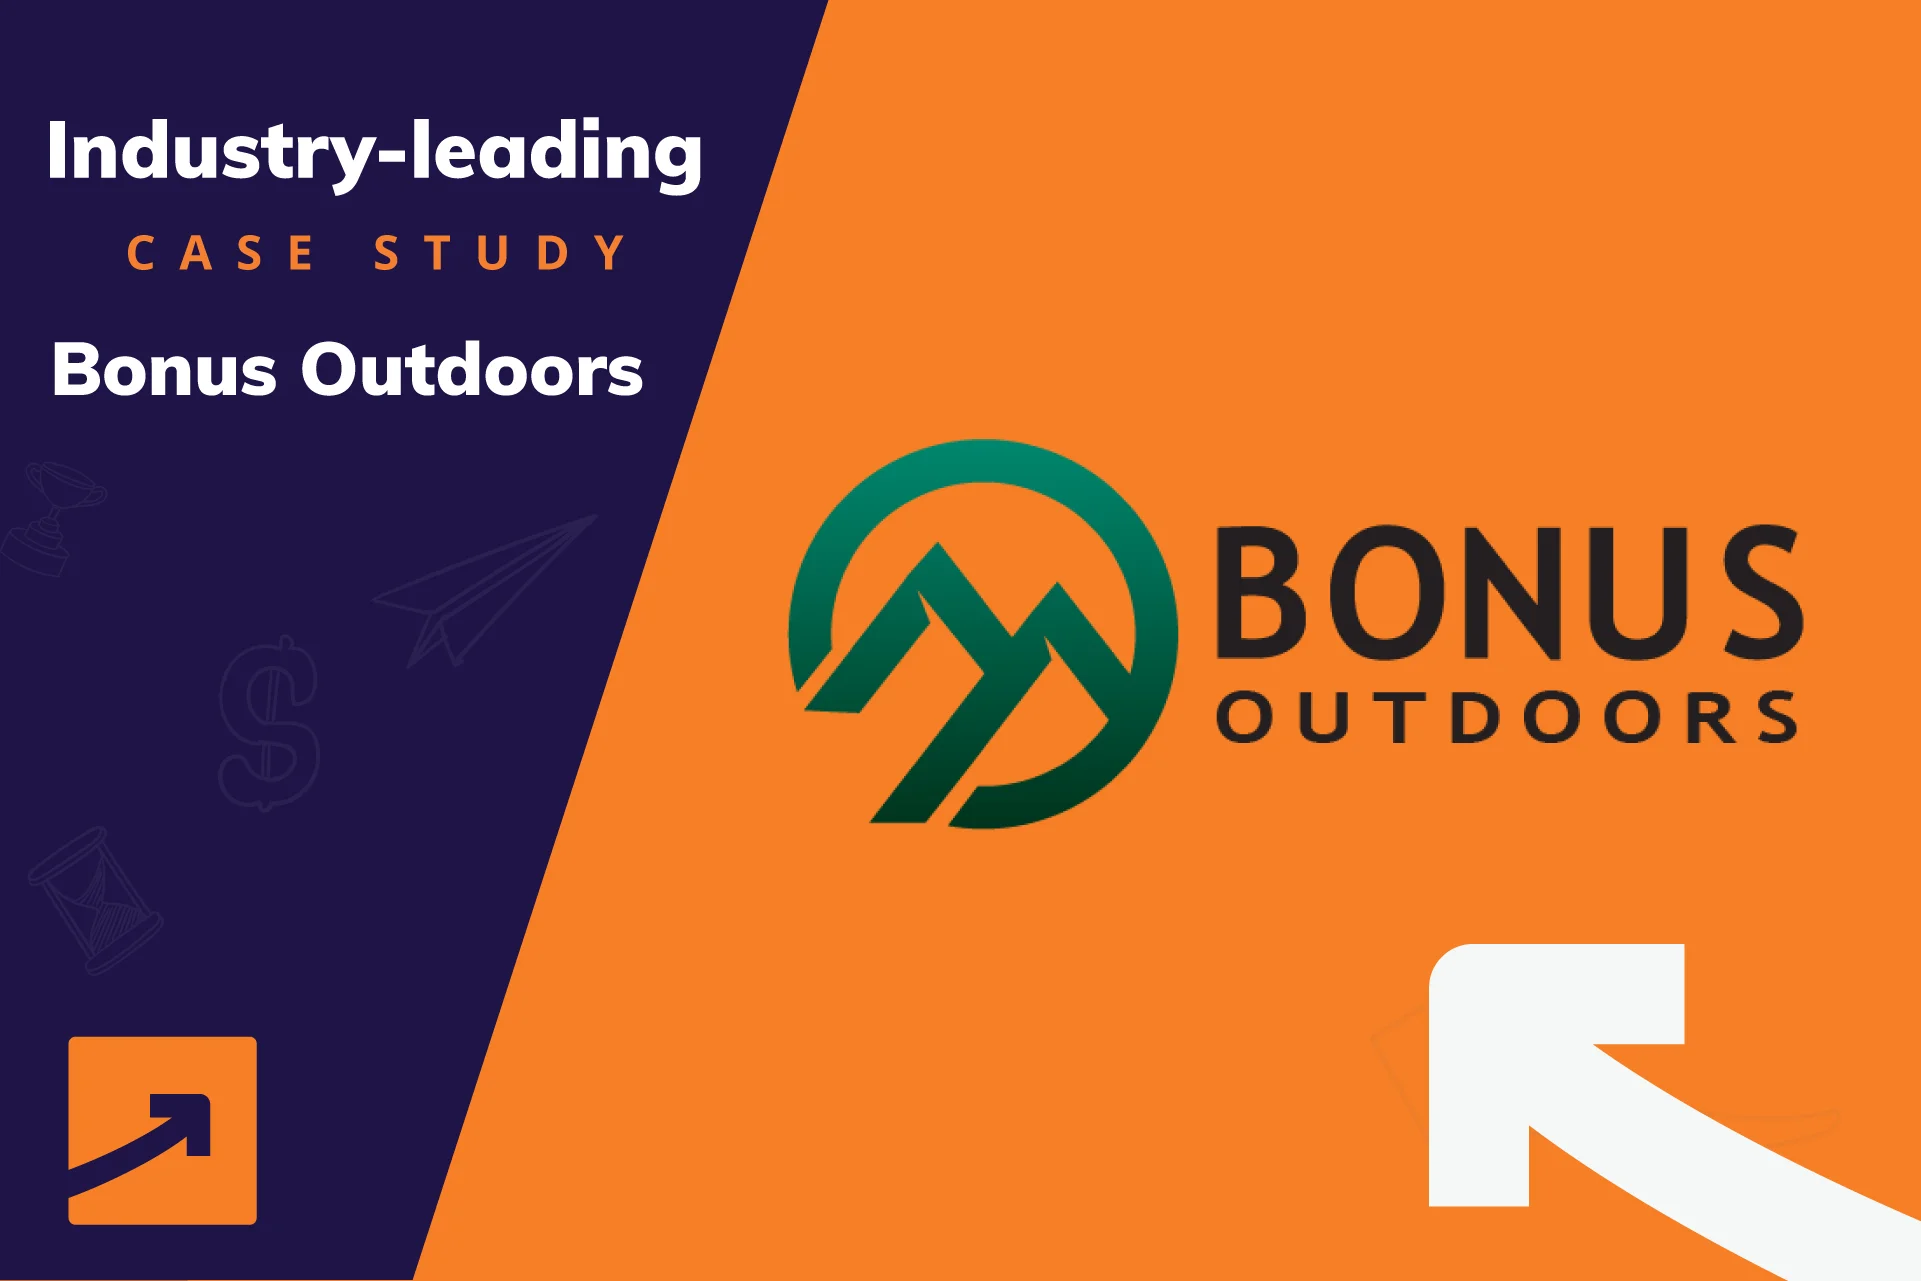 AMZDUDES Employs Strategies To Cut Inventory Costs By 42% And 59% Profit Boost For Bonus Outdoors!